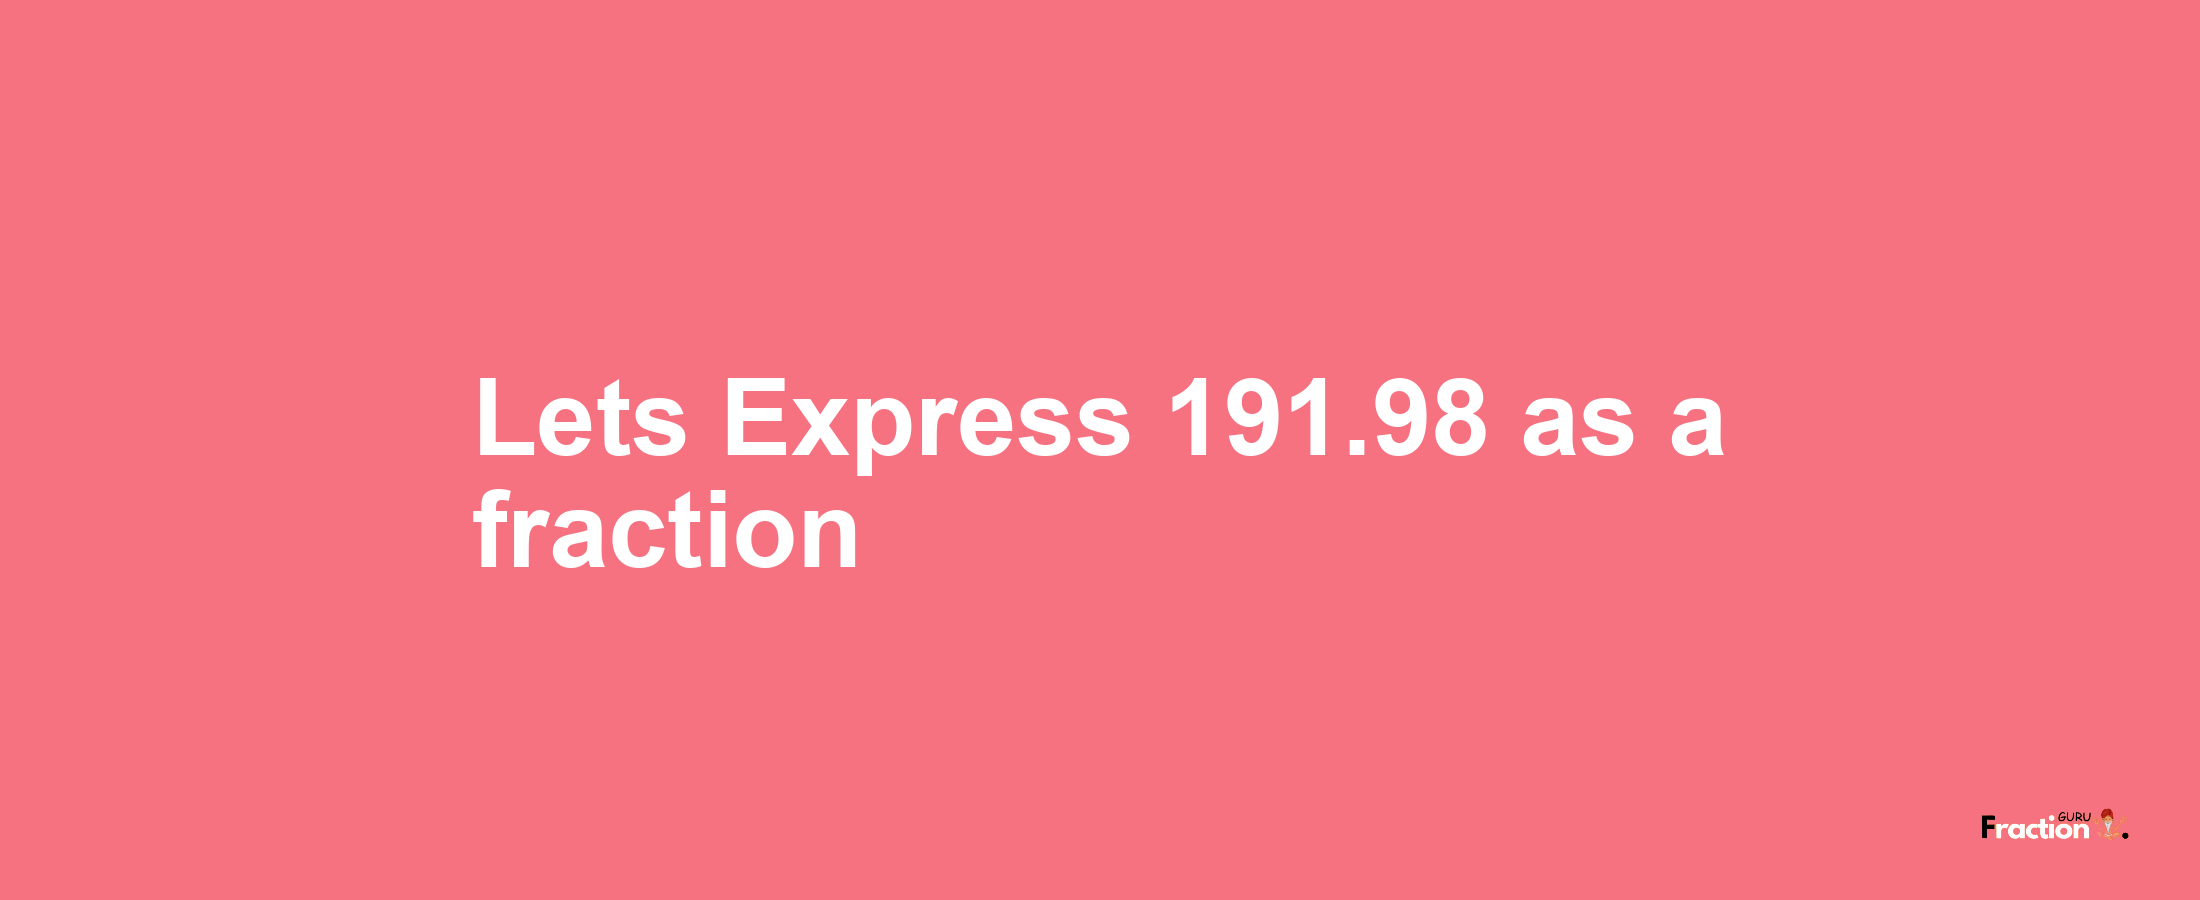 Lets Express 191.98 as afraction